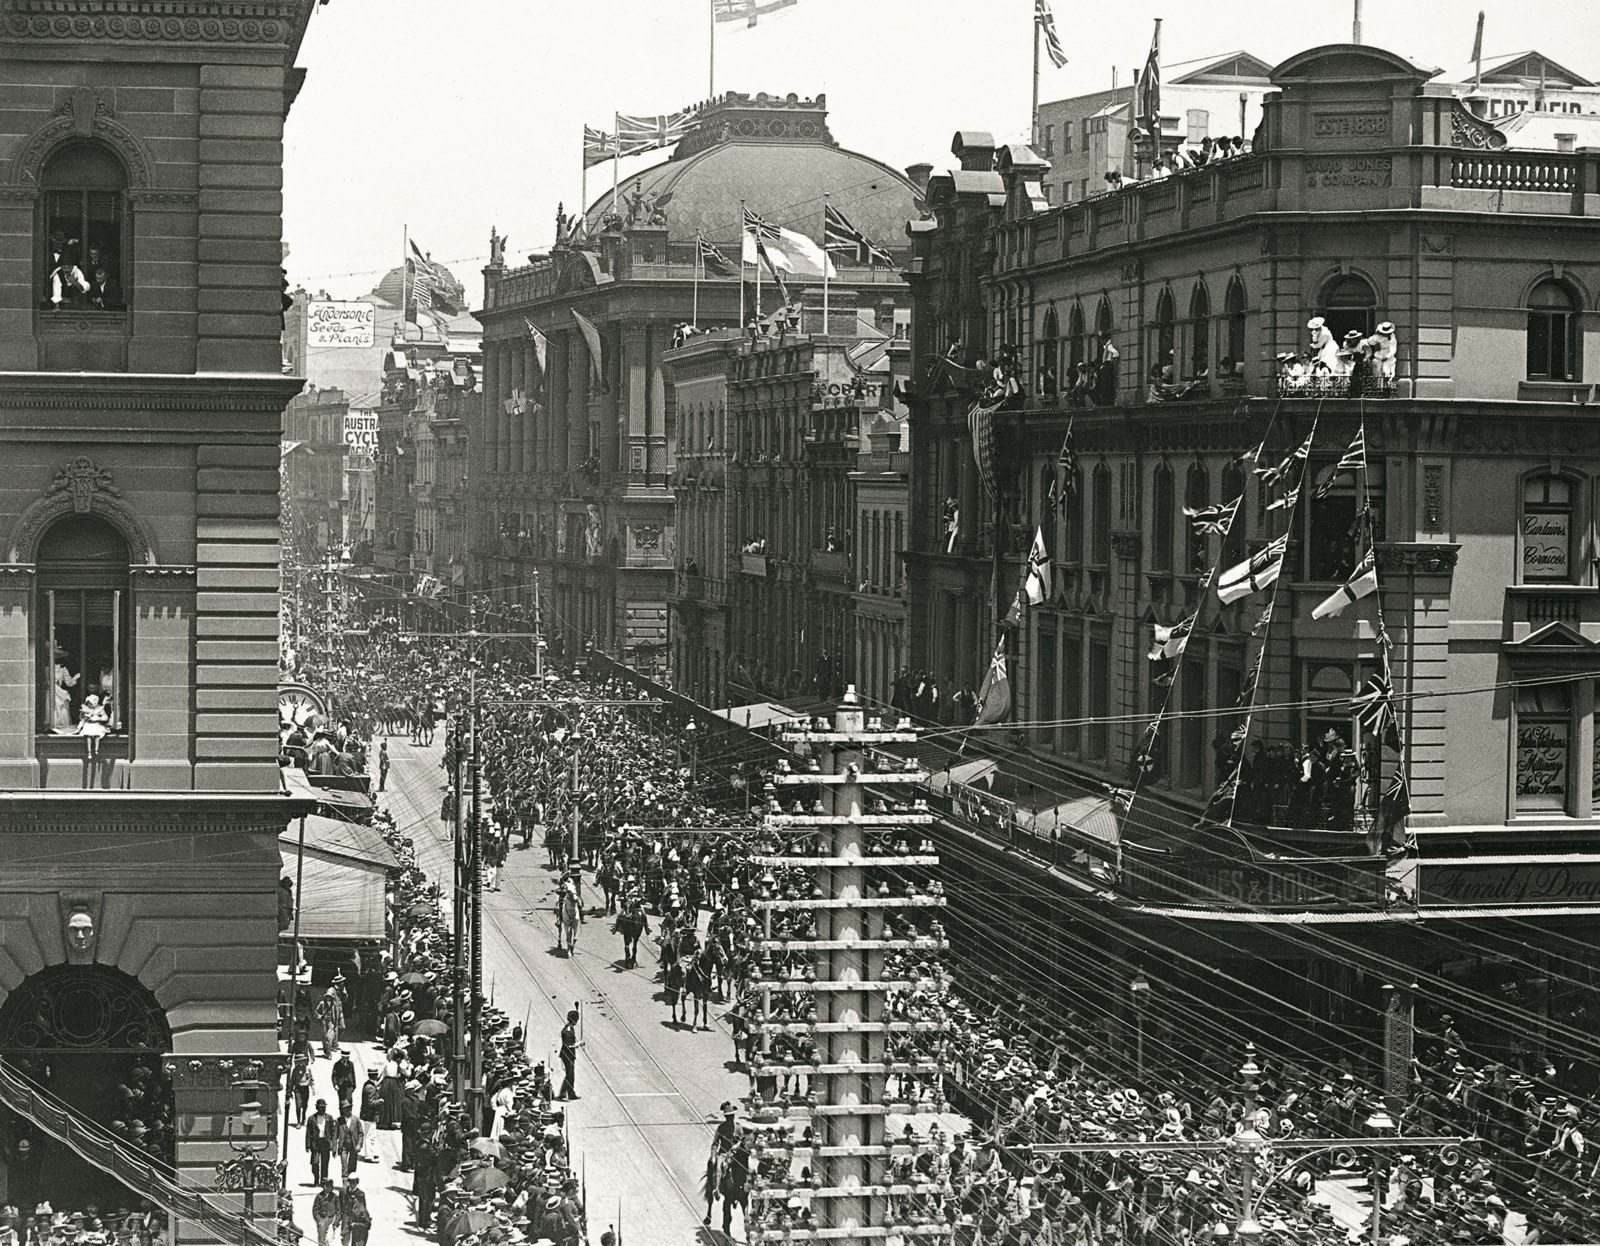 The procession in George St between King St & Martin Place